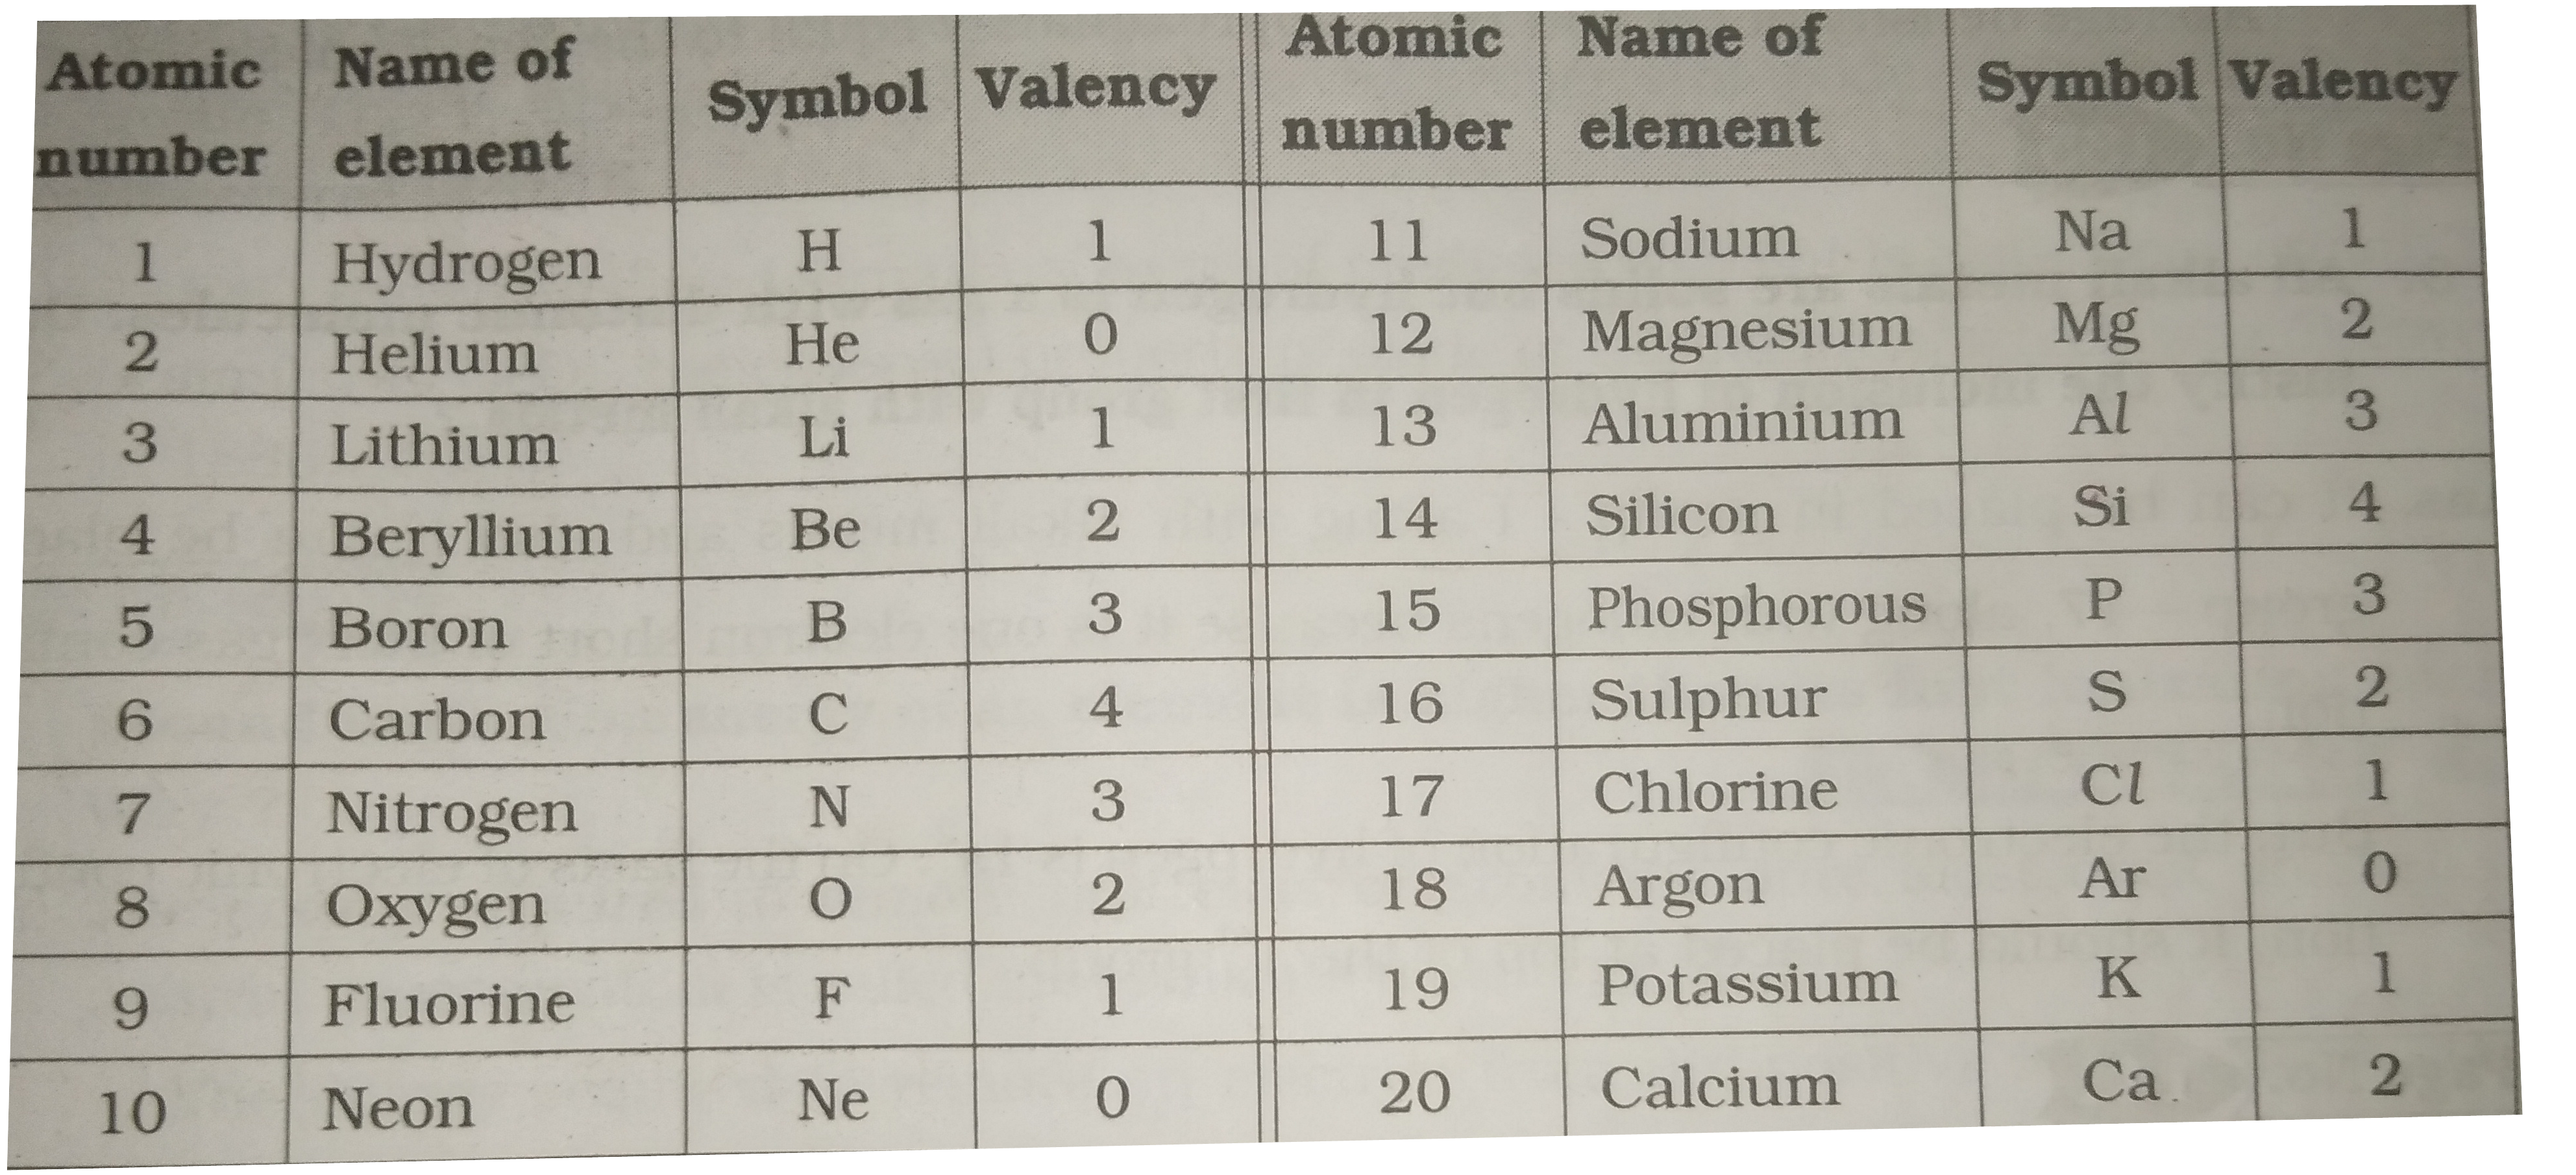 Find  out the  valencies  of first  20  elements  :        How  does  the valency  vary in a period  on  going  from  left  to  right ?